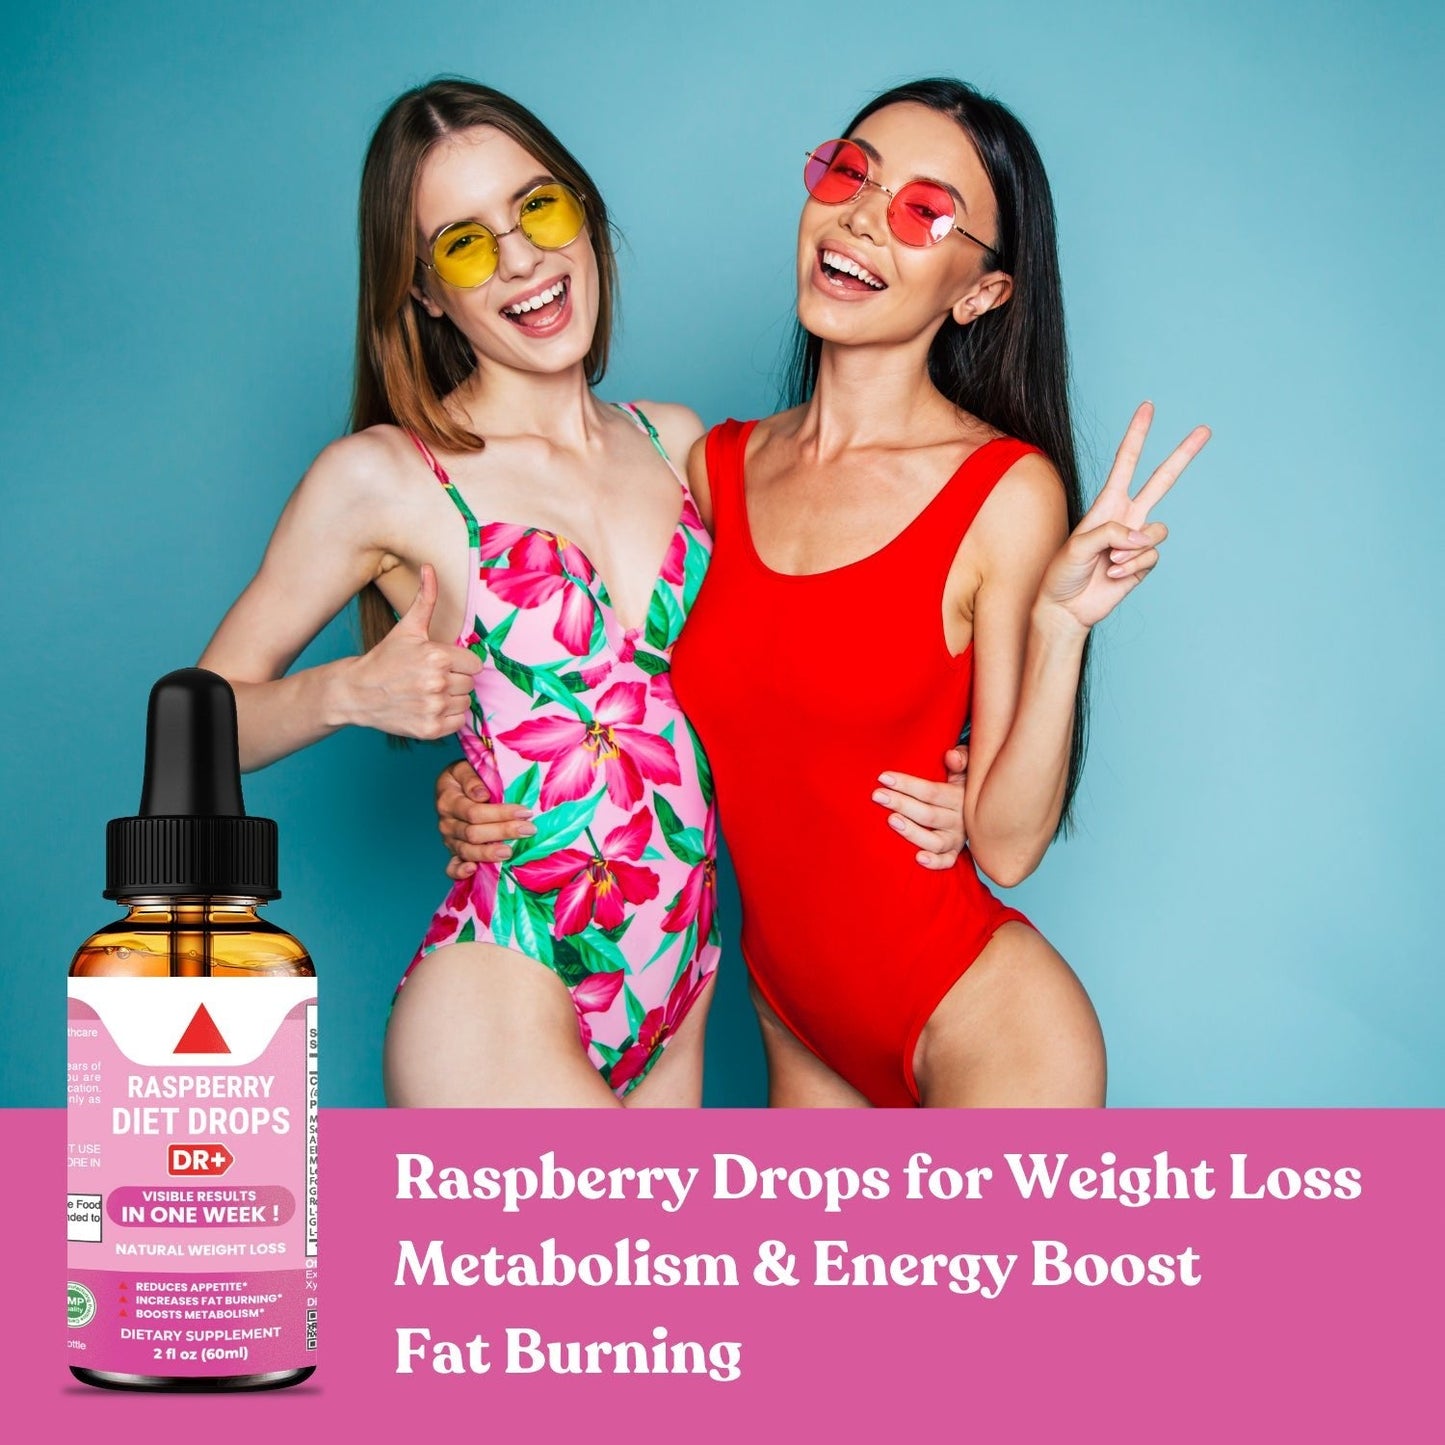 Keto Fat Burner Raspberry Diet Drops Lose Stomach & Boost Energy with Natural Keto drops | 2oz - Herblif Nutrition USA